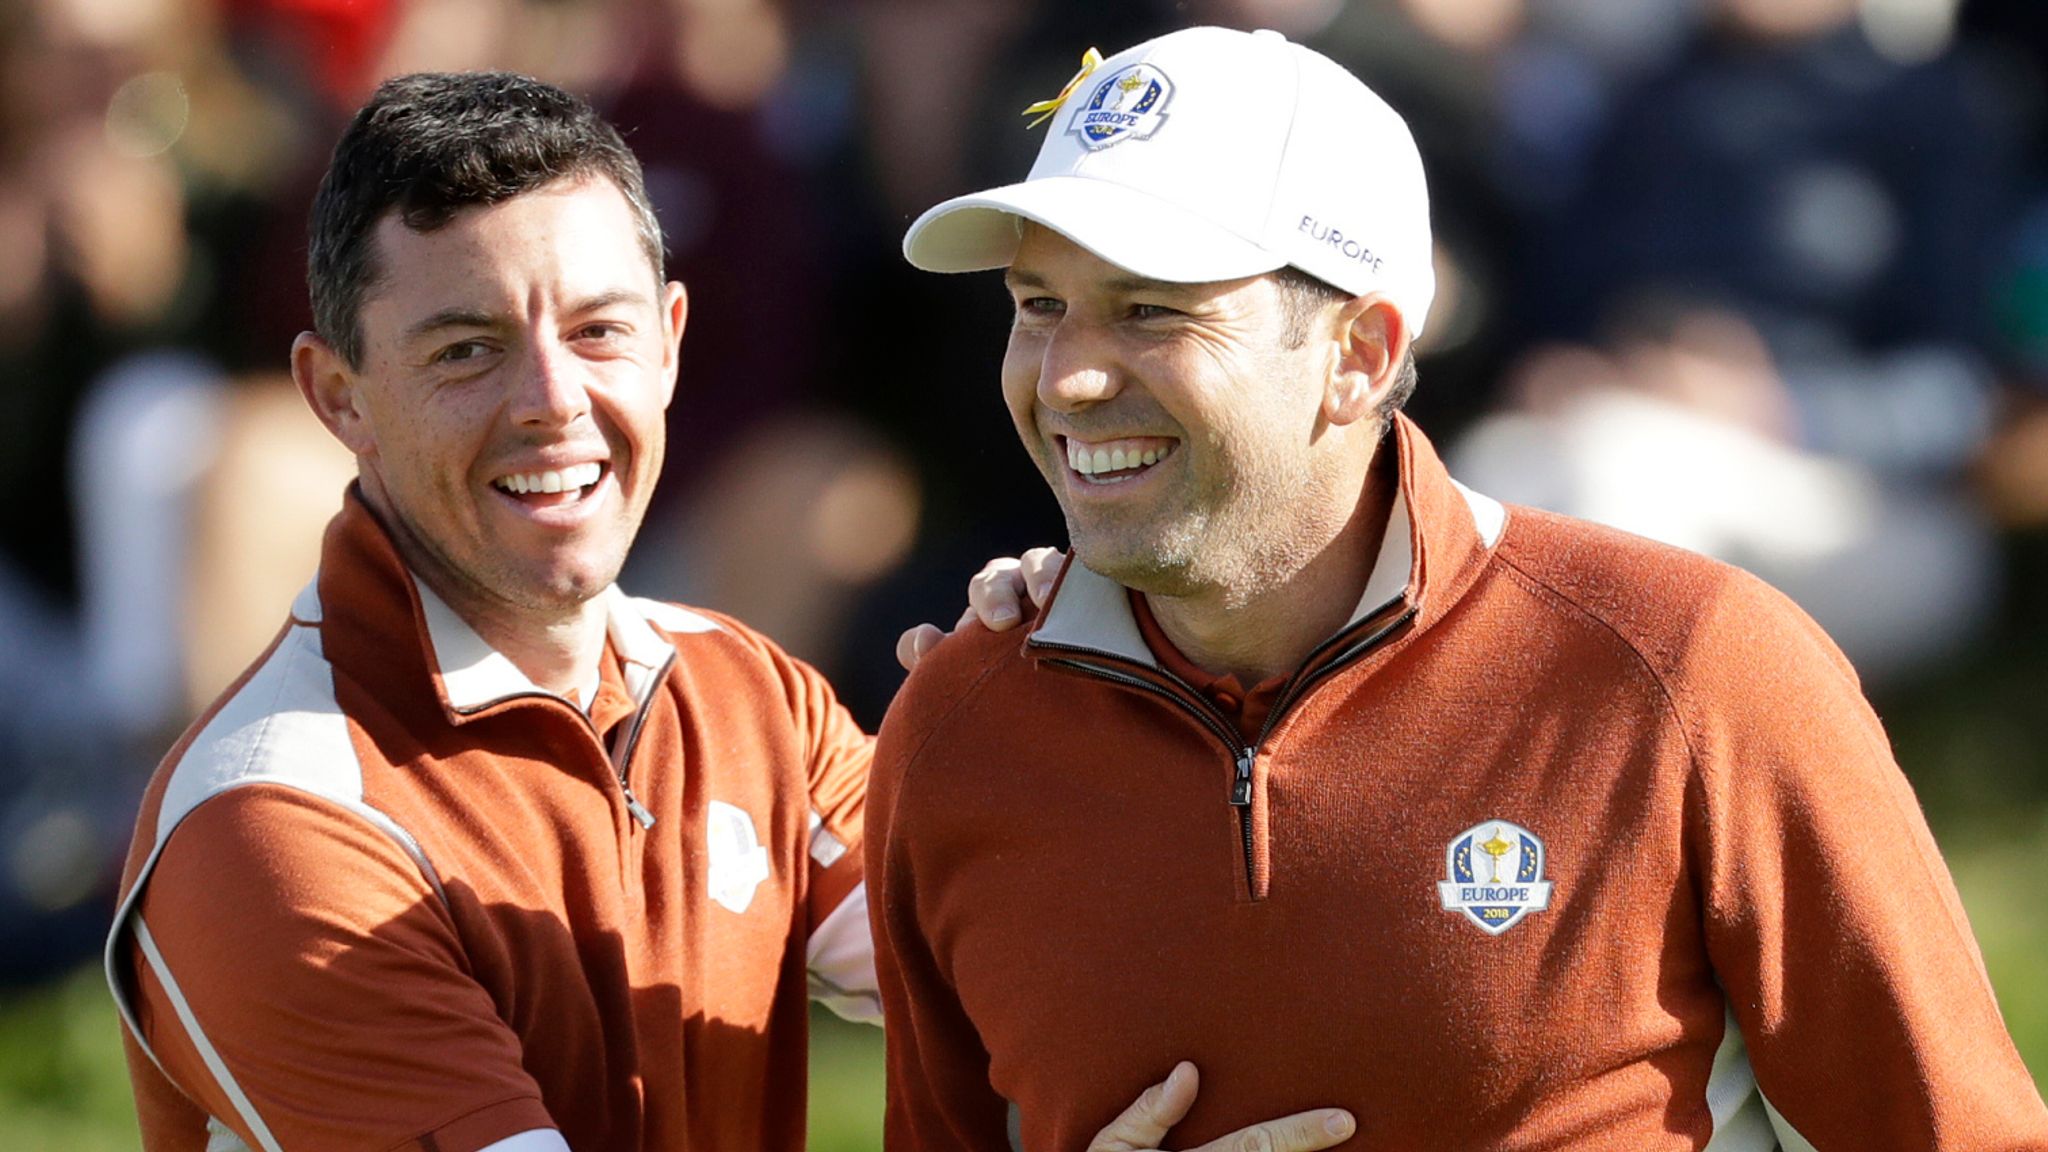 Sergio Garcia Confirms He and Rory McIlroy Are Back on Speaking Terms